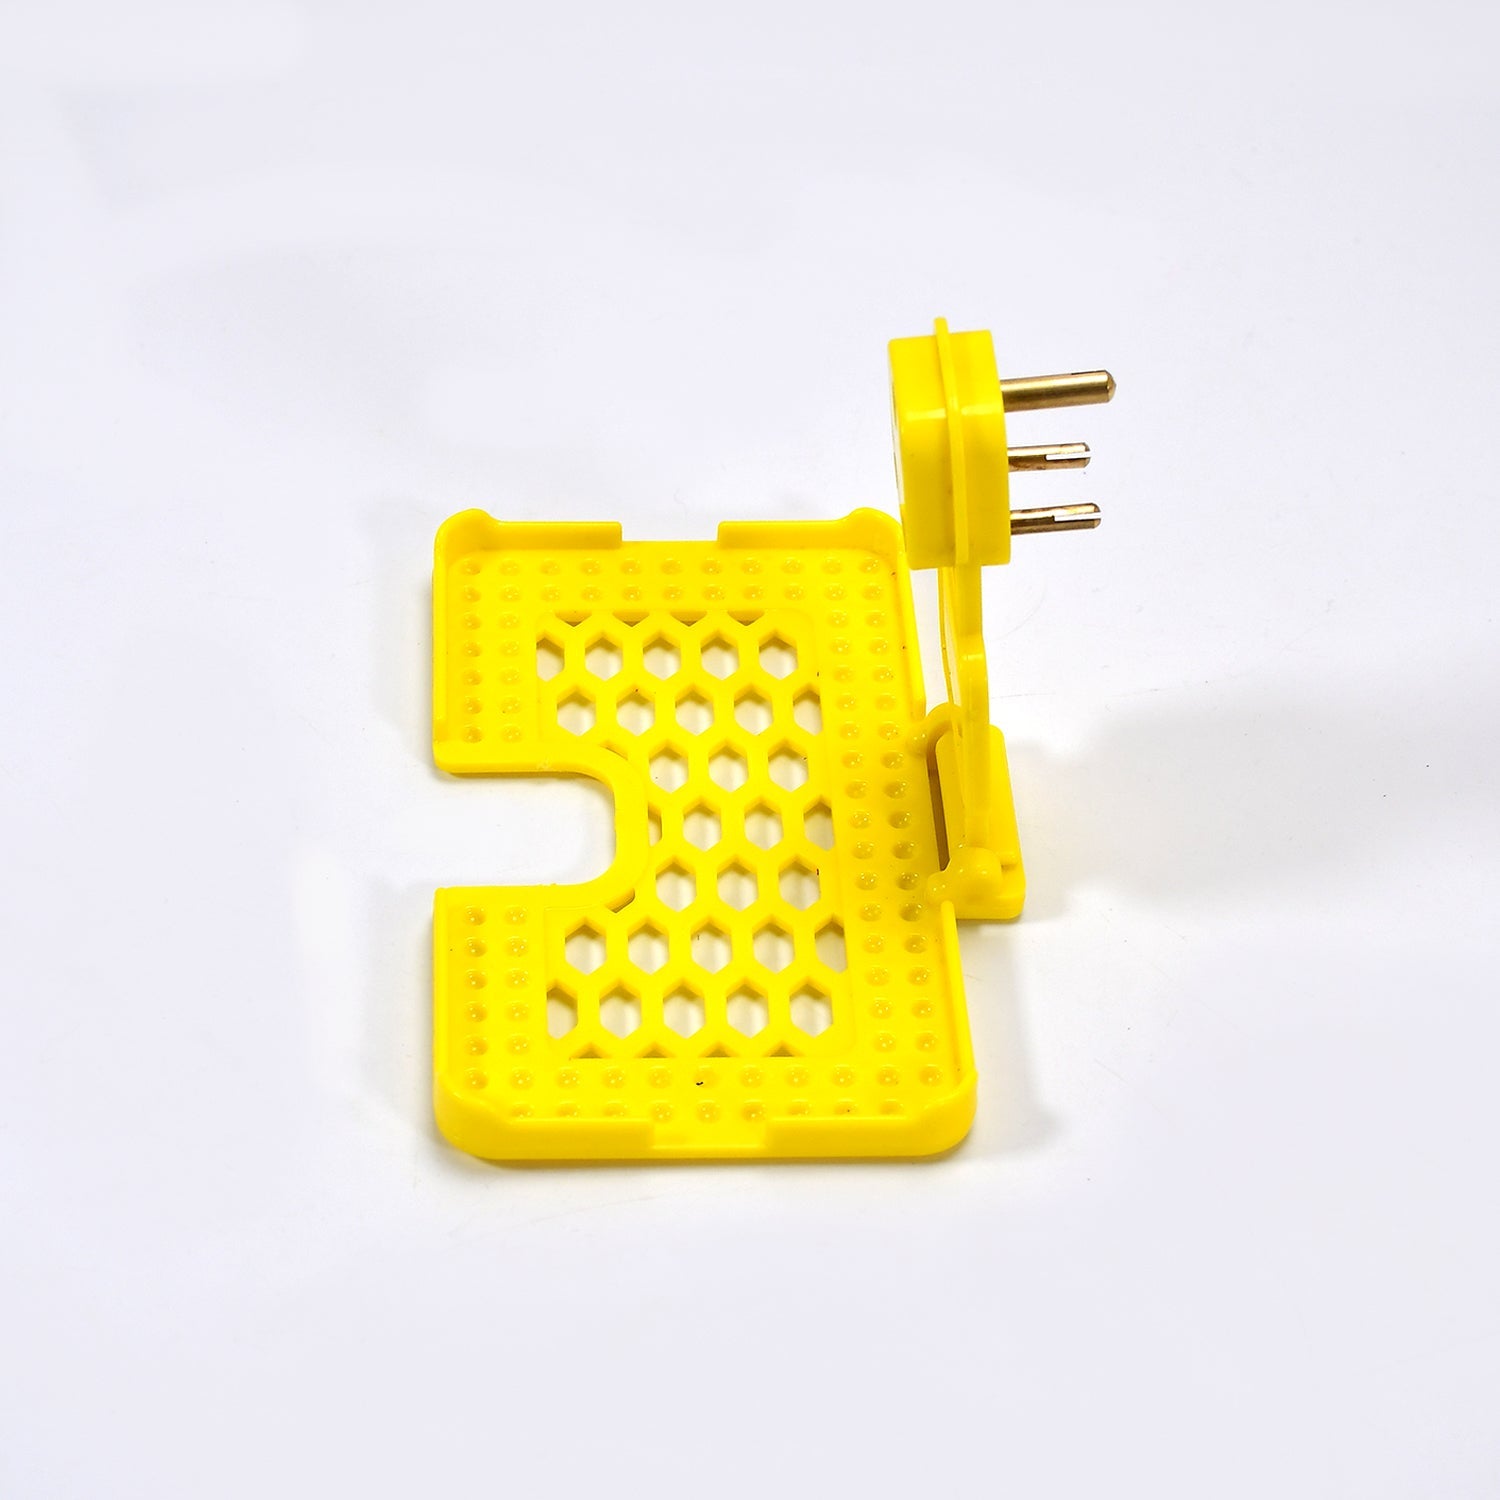 6496Y Multi-Purpose Wall Holder Stand for Charging Mobile Just Fit in Socket and Hang (Yellow) 